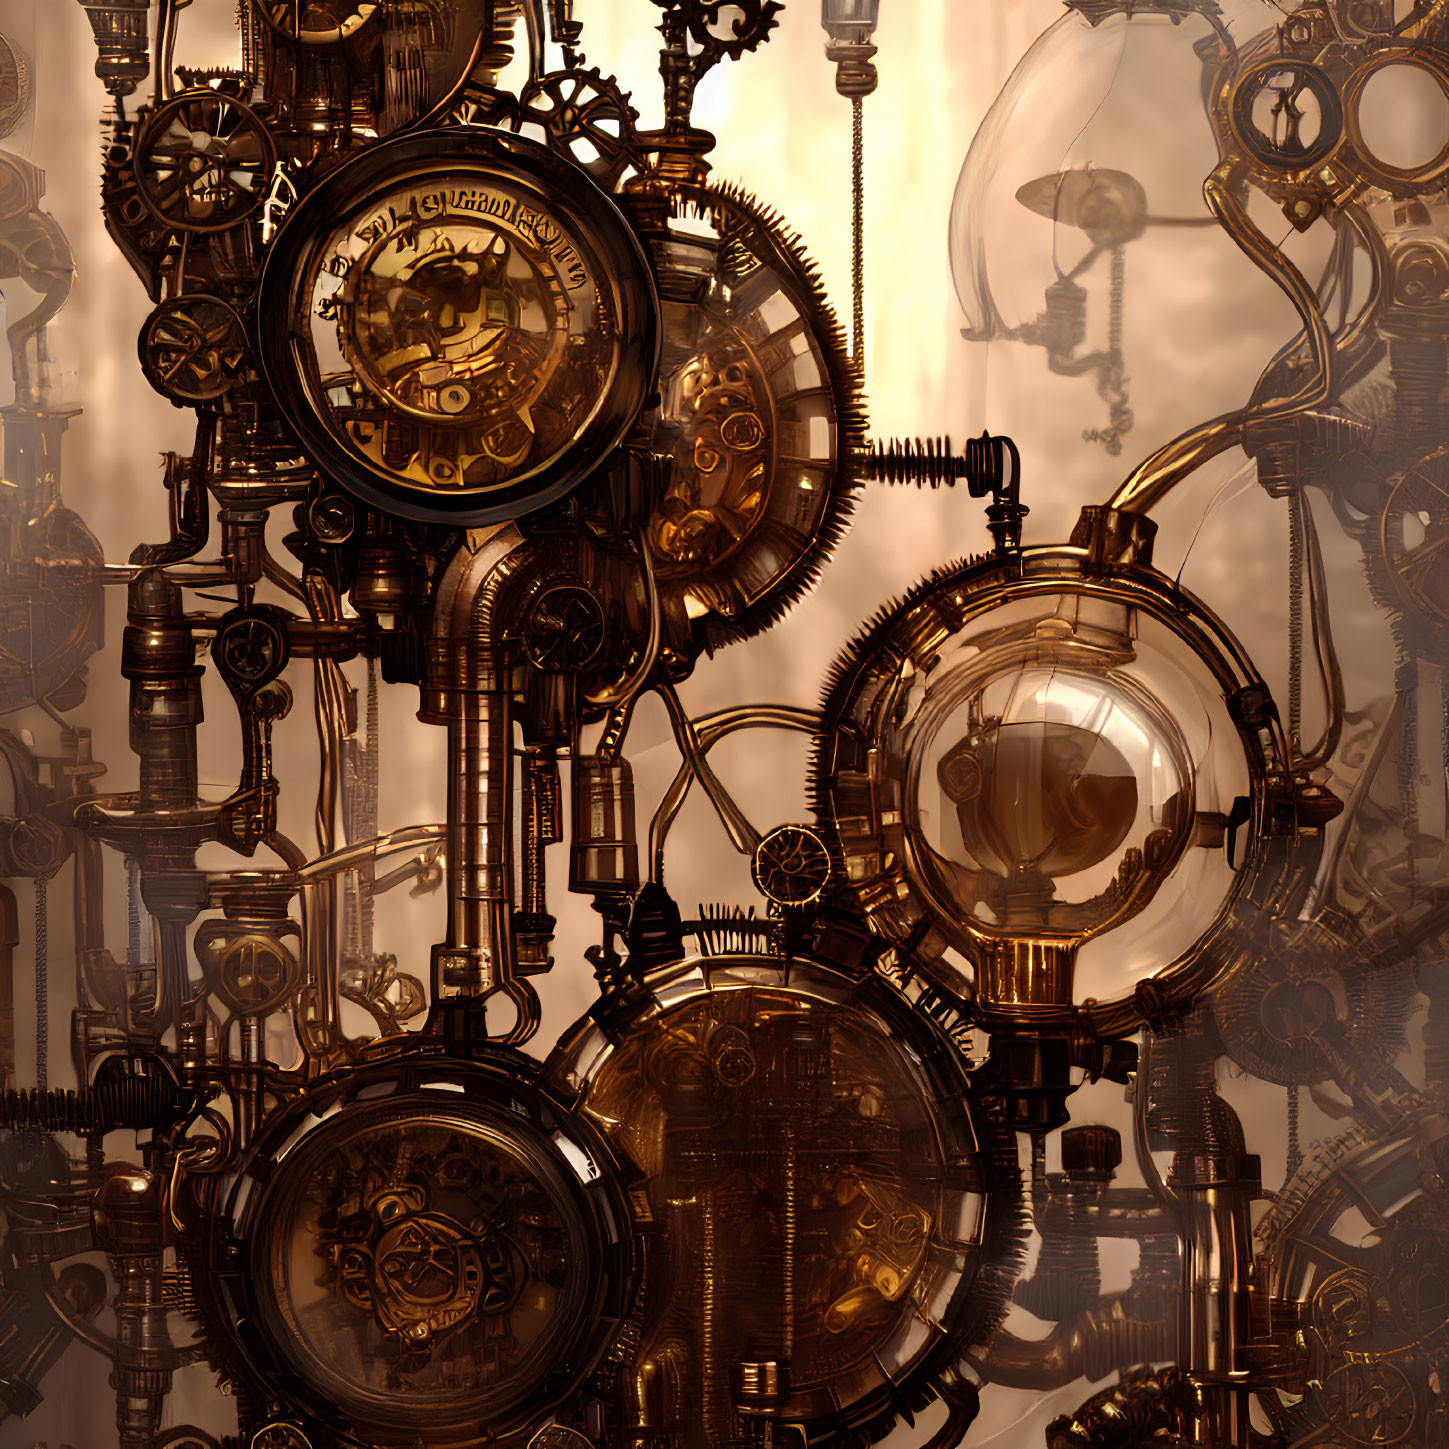 Detailed Steampunk Machinery with Cogs, Gears, and Glowing Bulbs